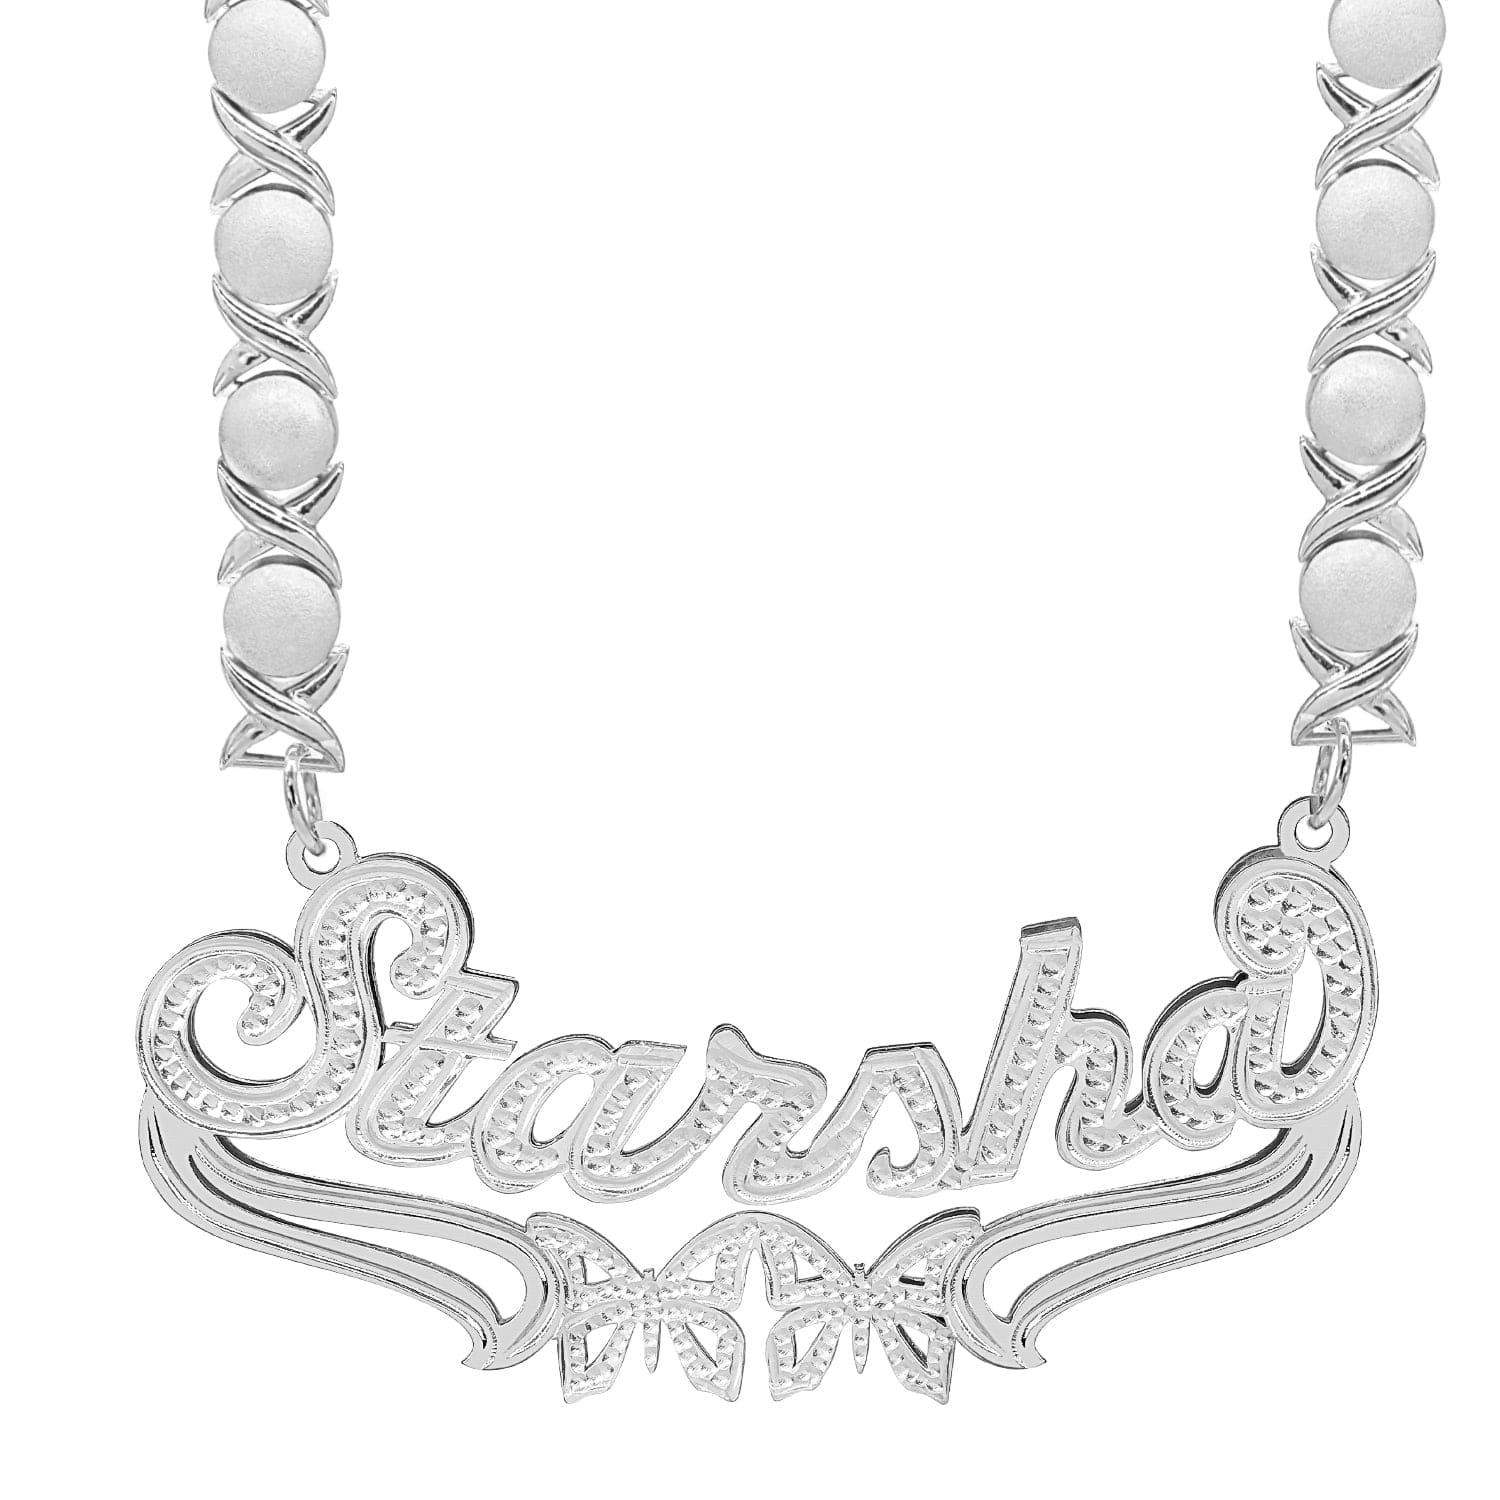 Two-Tone. Sterling Silver / Rhodium Xoxo Chain Custom Double Plated Name Necklace "Starsha" with Rhodium Xoxo Chain